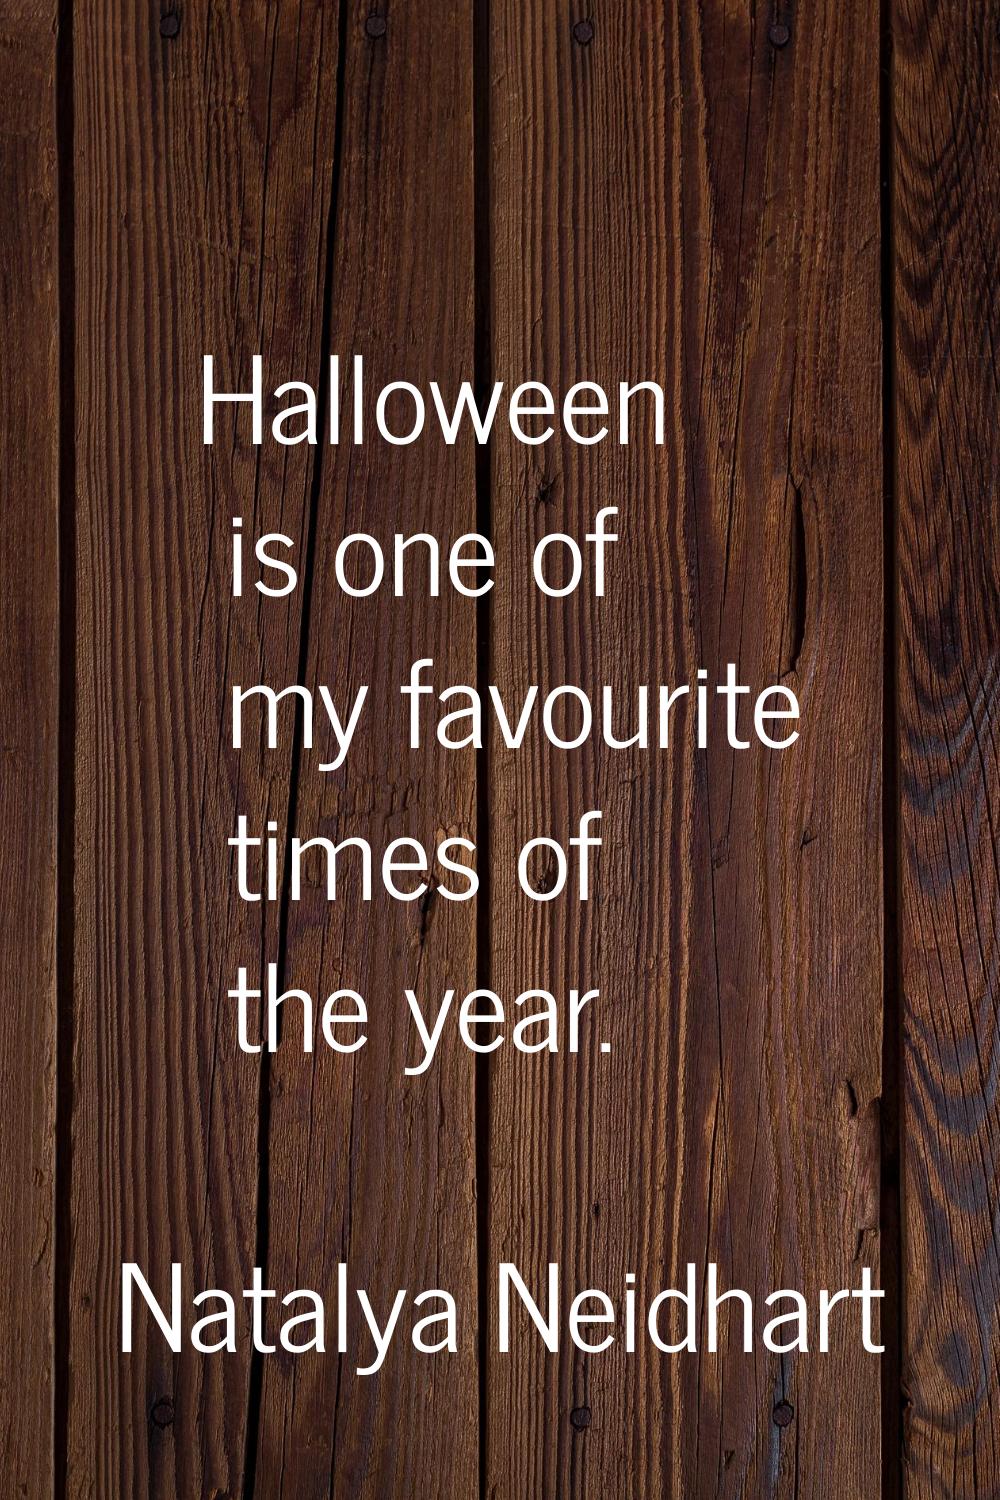 Halloween is one of my favourite times of the year.